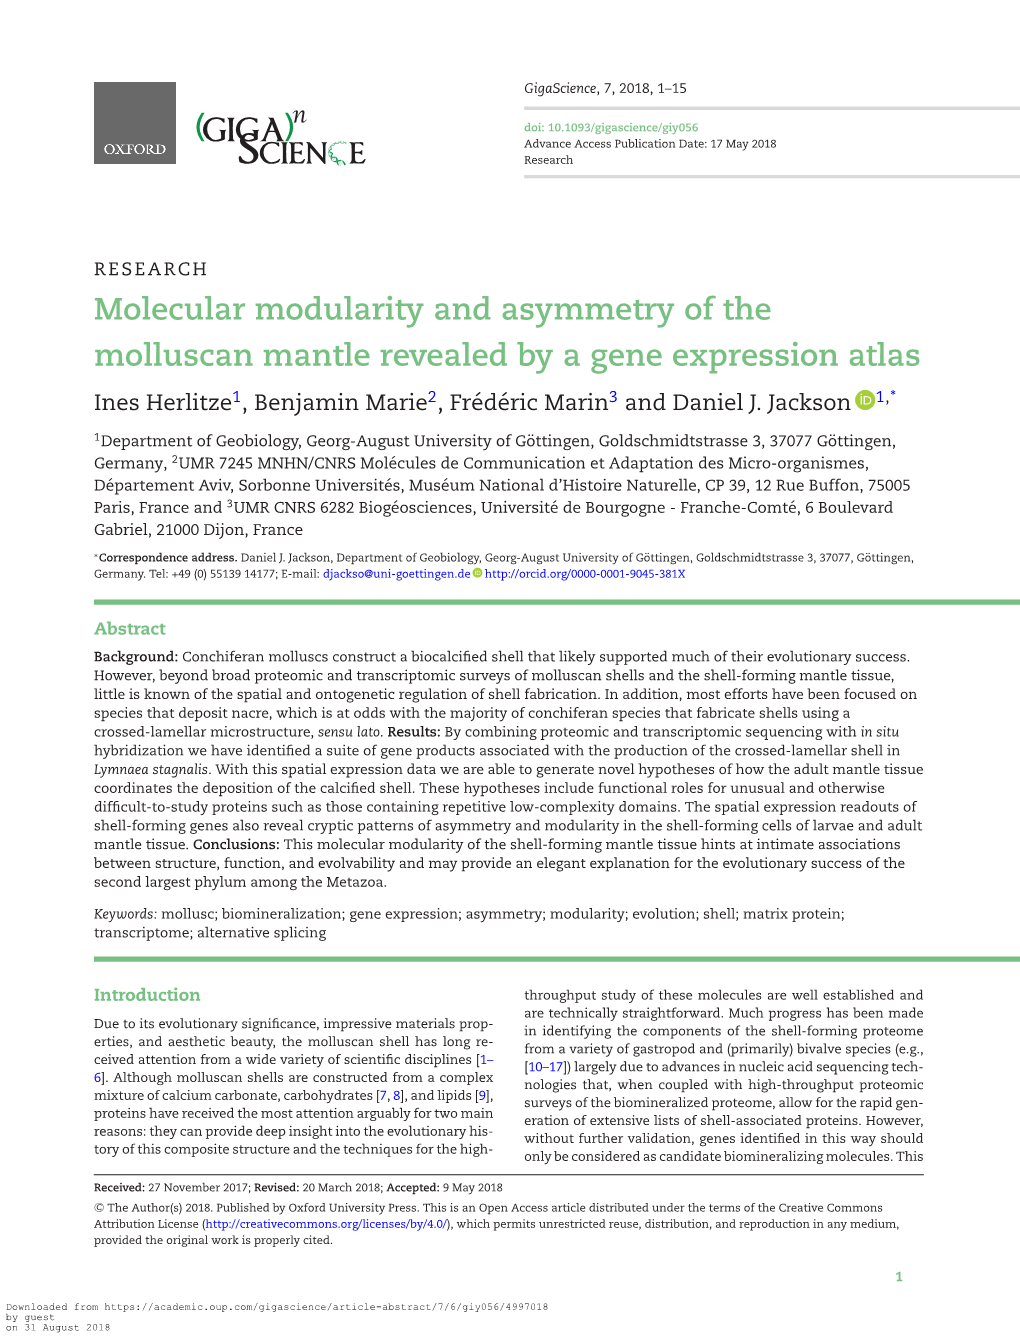 Molecular Modularity and Asymmetry of the Molluscan Mantle Revealed by a Gene Expression Atlas Ines Herlitze1, Benjamin Marie2,Fred´ Eric´ Marin3 and Daniel J